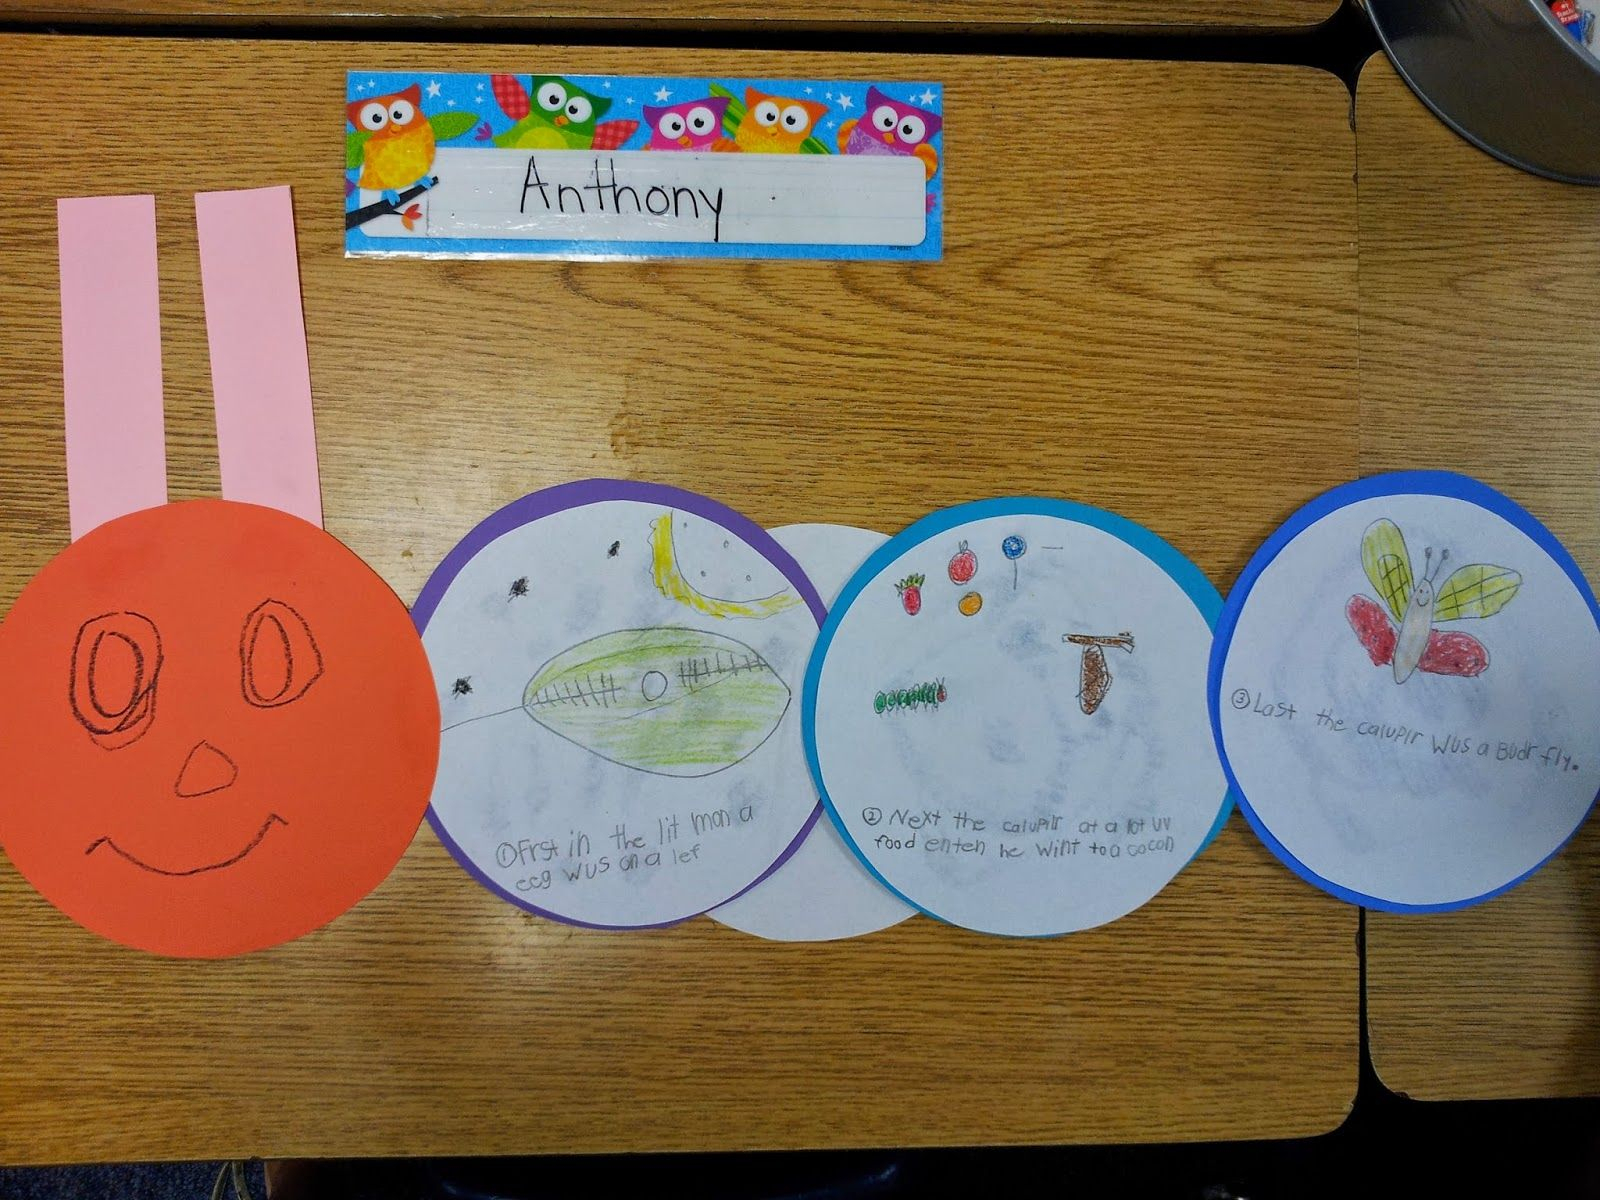 The Very Hungry Caterpillar | Very Hungry Caterpillar, The